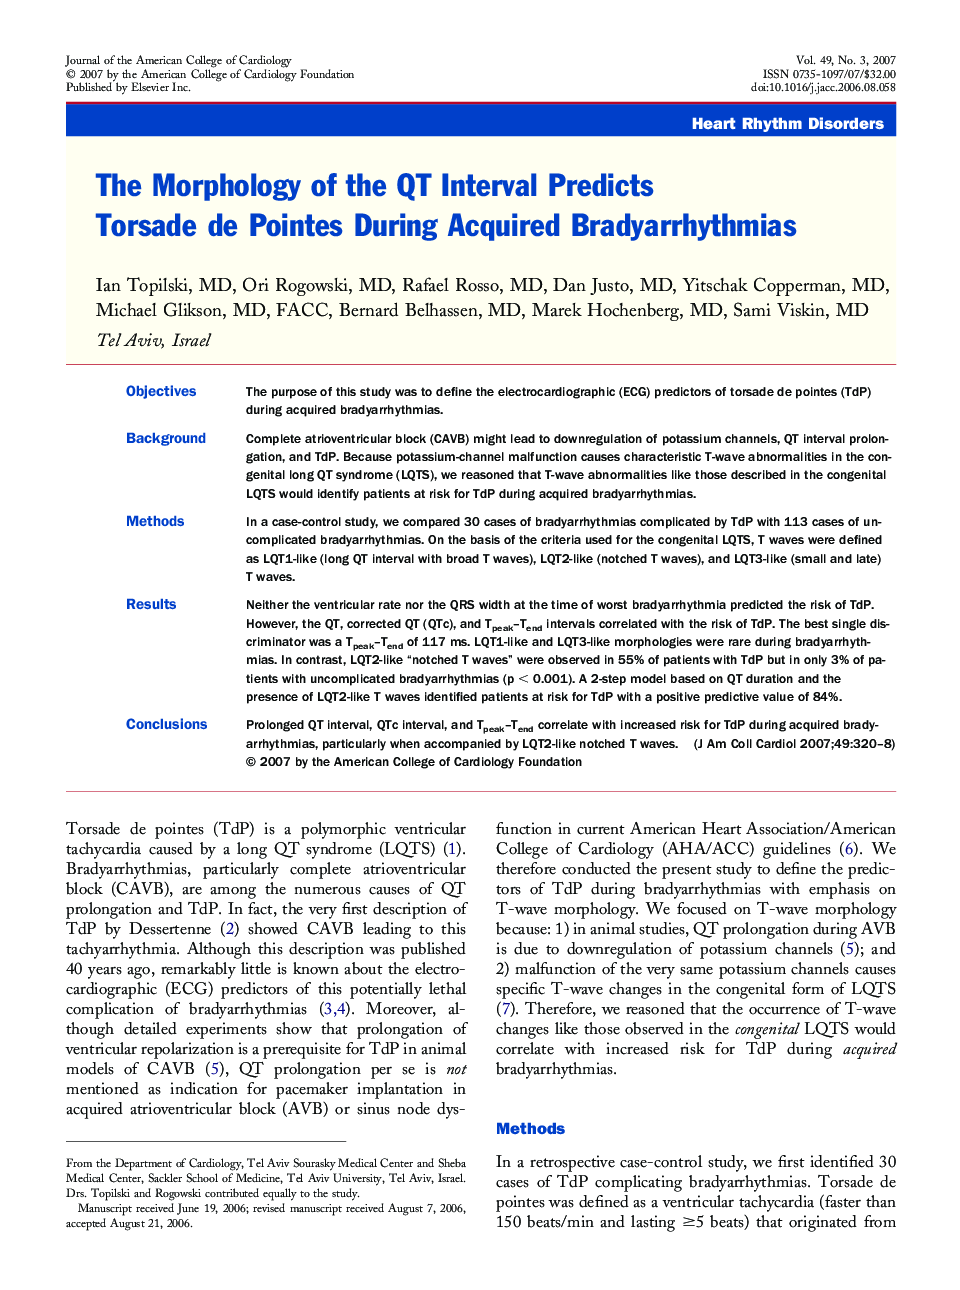 The Morphology of the QT Interval Predicts Torsade de Pointes During Acquired Bradyarrhythmias